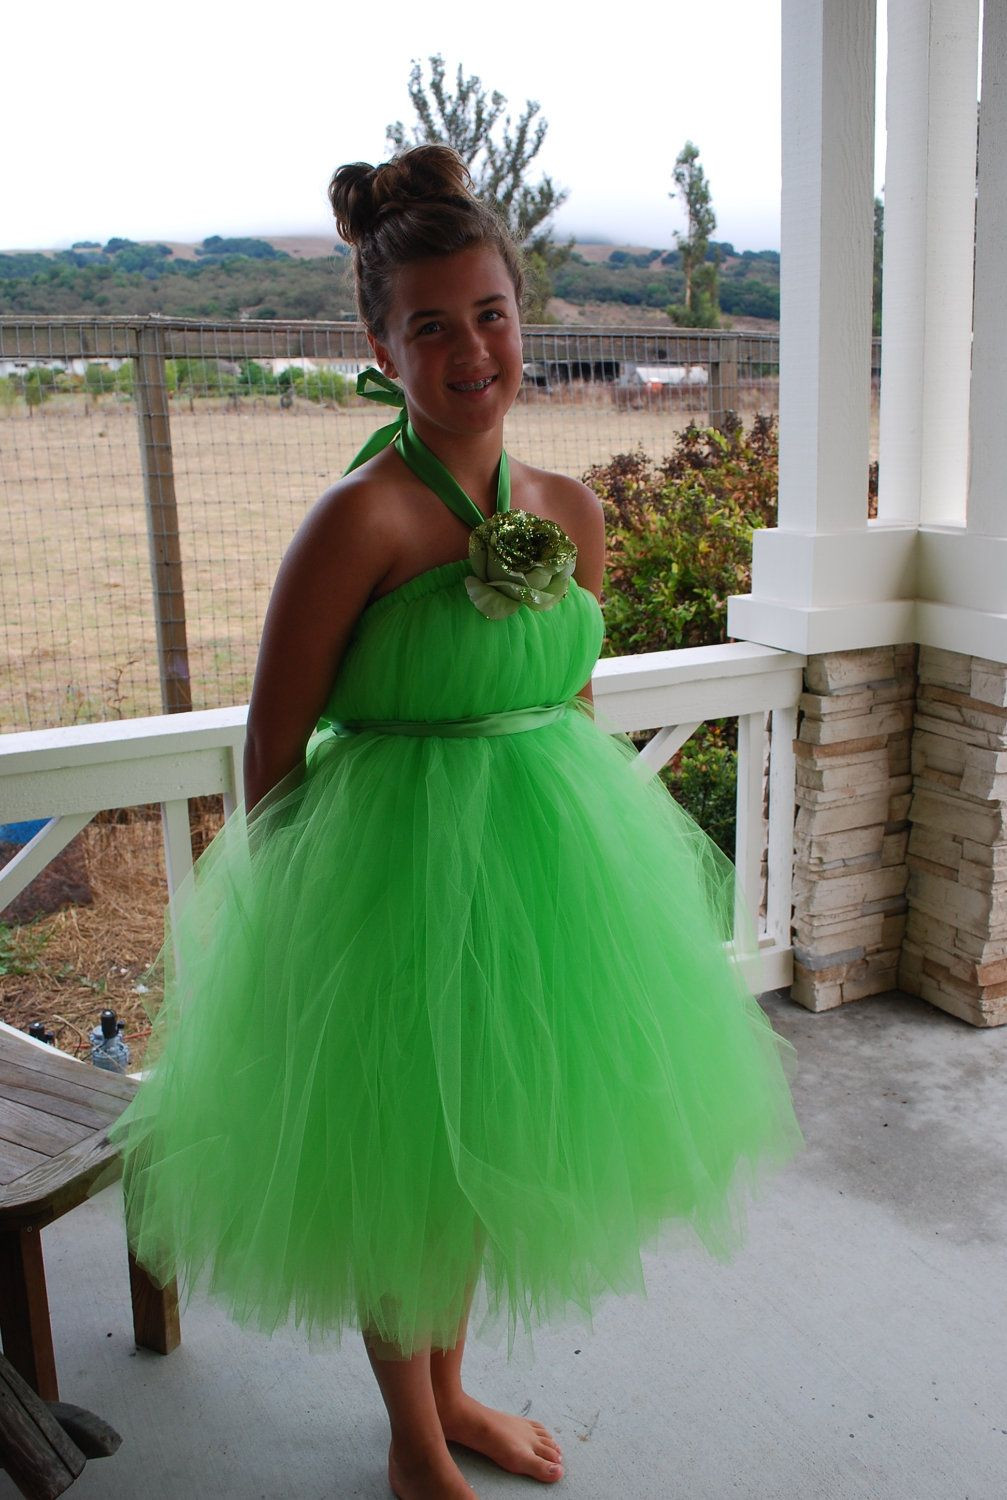 Tinkerbell Costume Adult DIY
 Adult or Teen Tinkerbell Tutu Dress via Etsy Could make